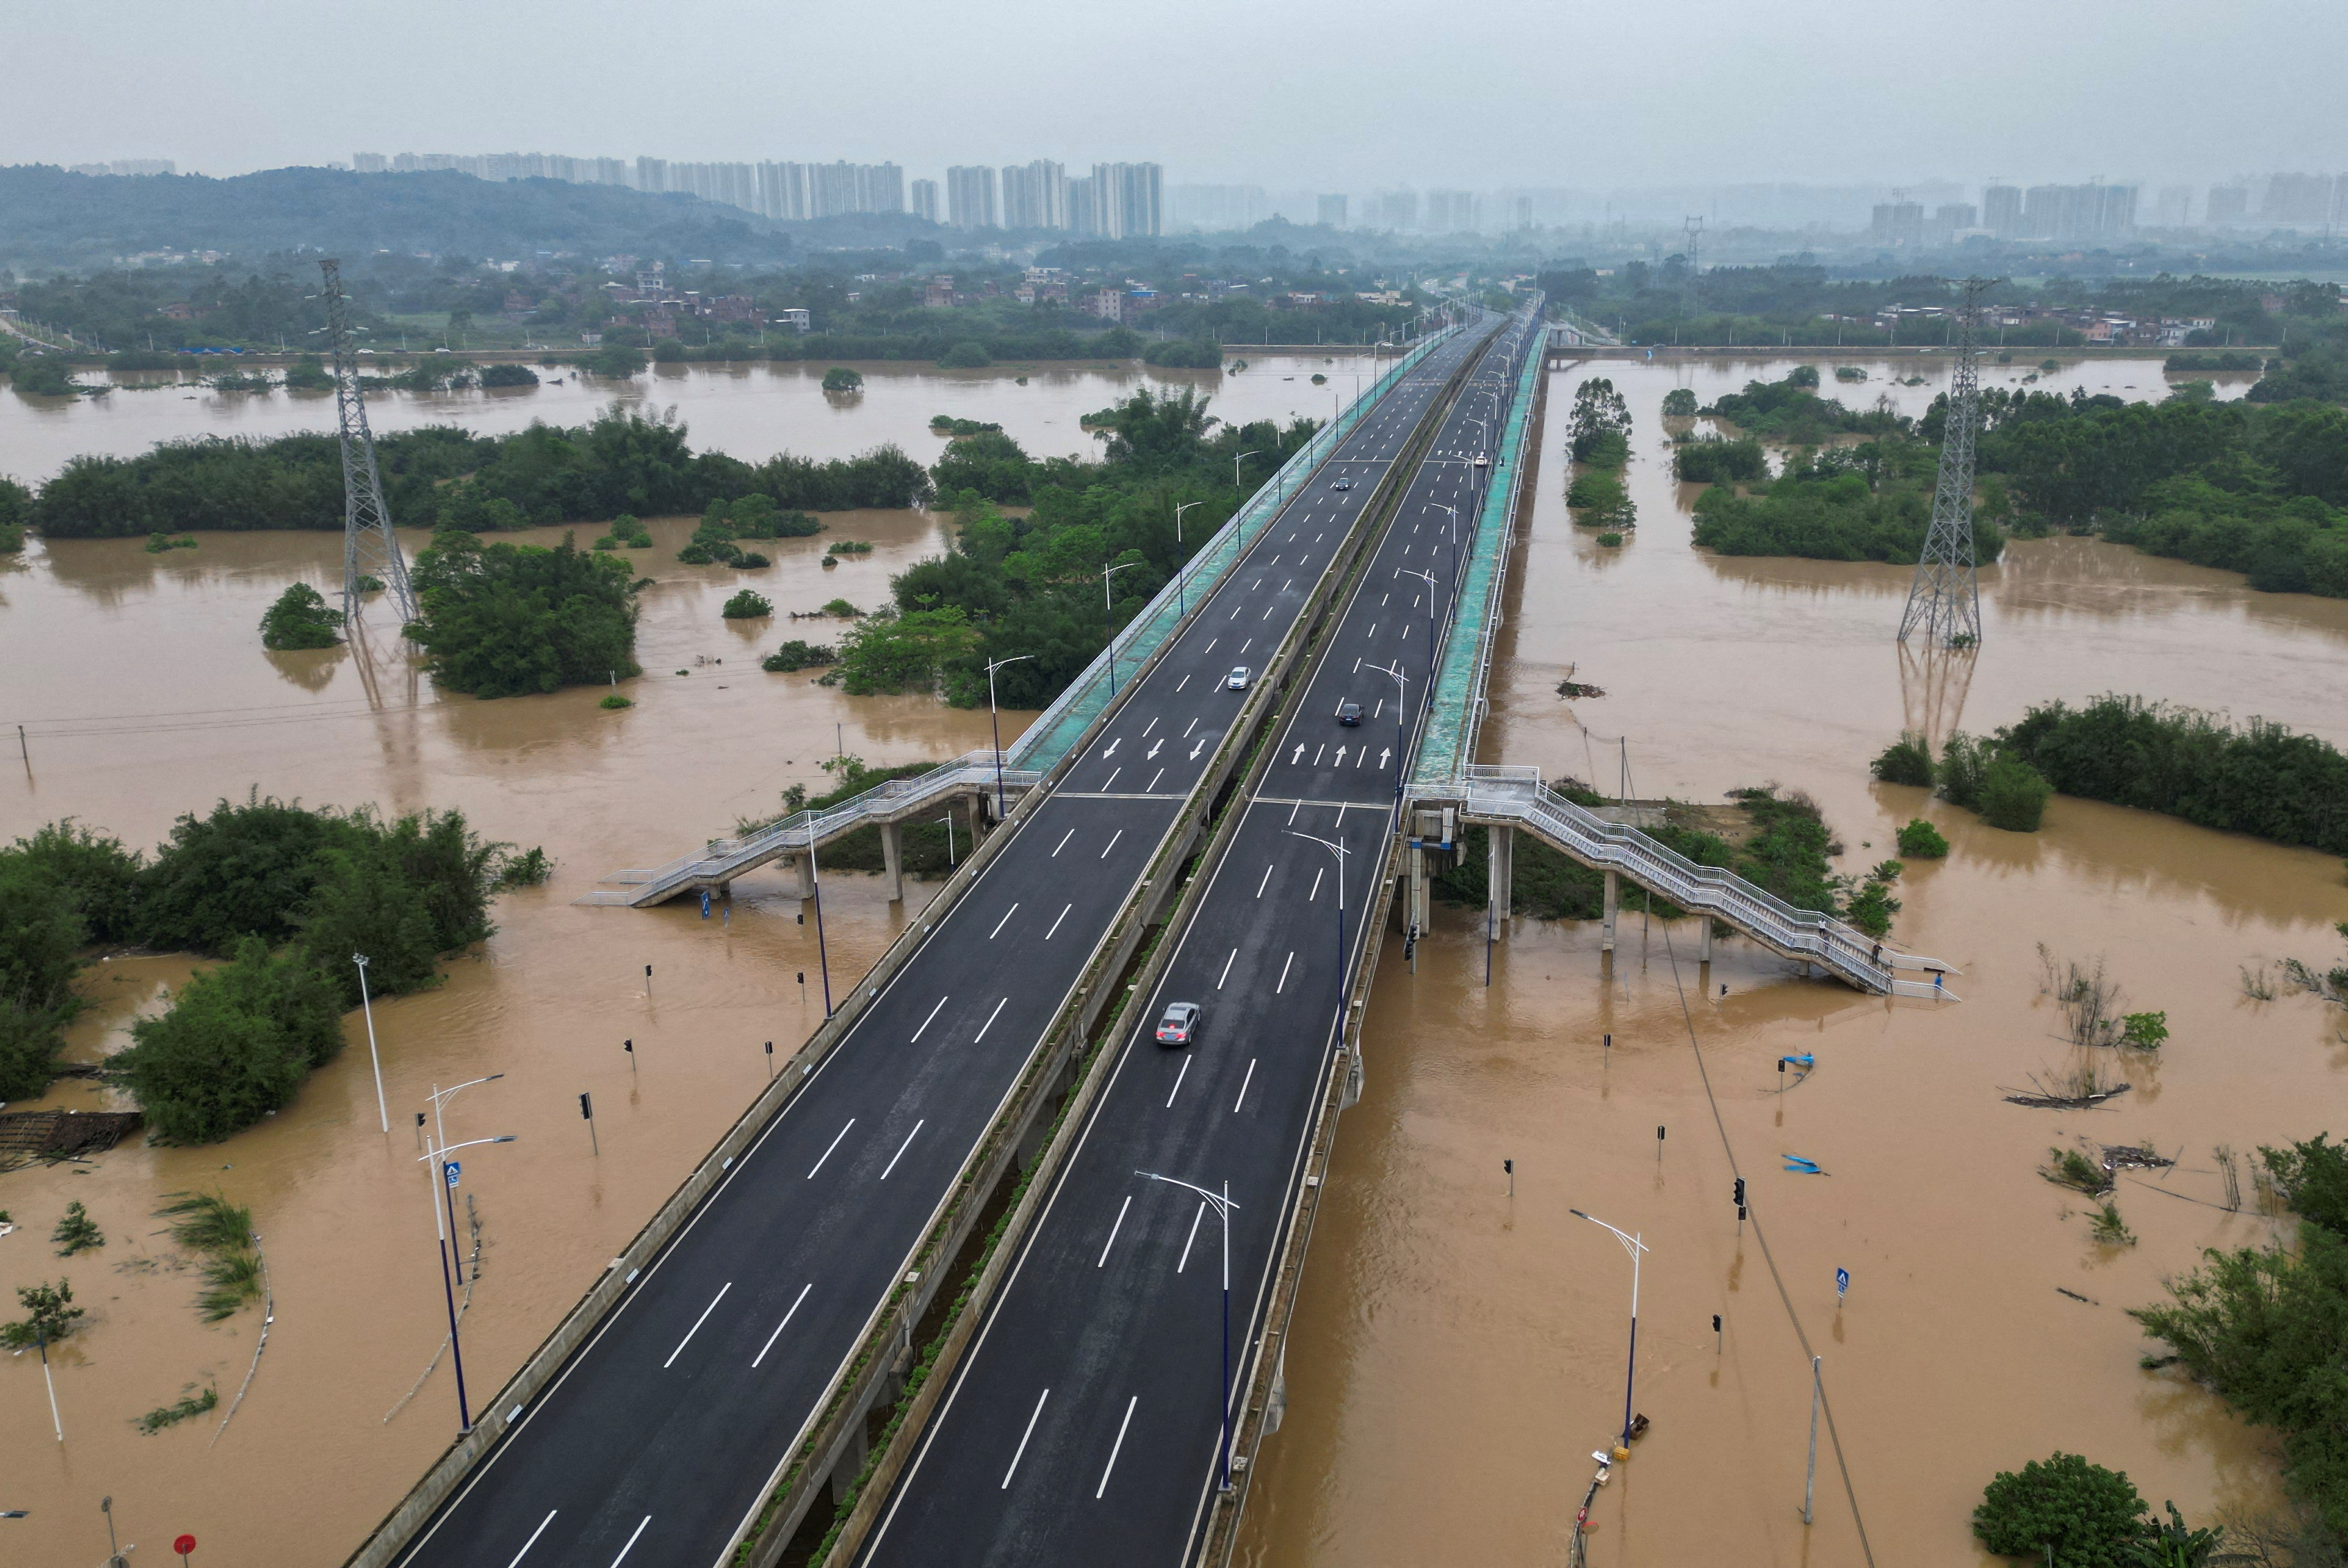 Drone view shows roads submerged in floodwaters following heavy rainfall,in Qingyuan